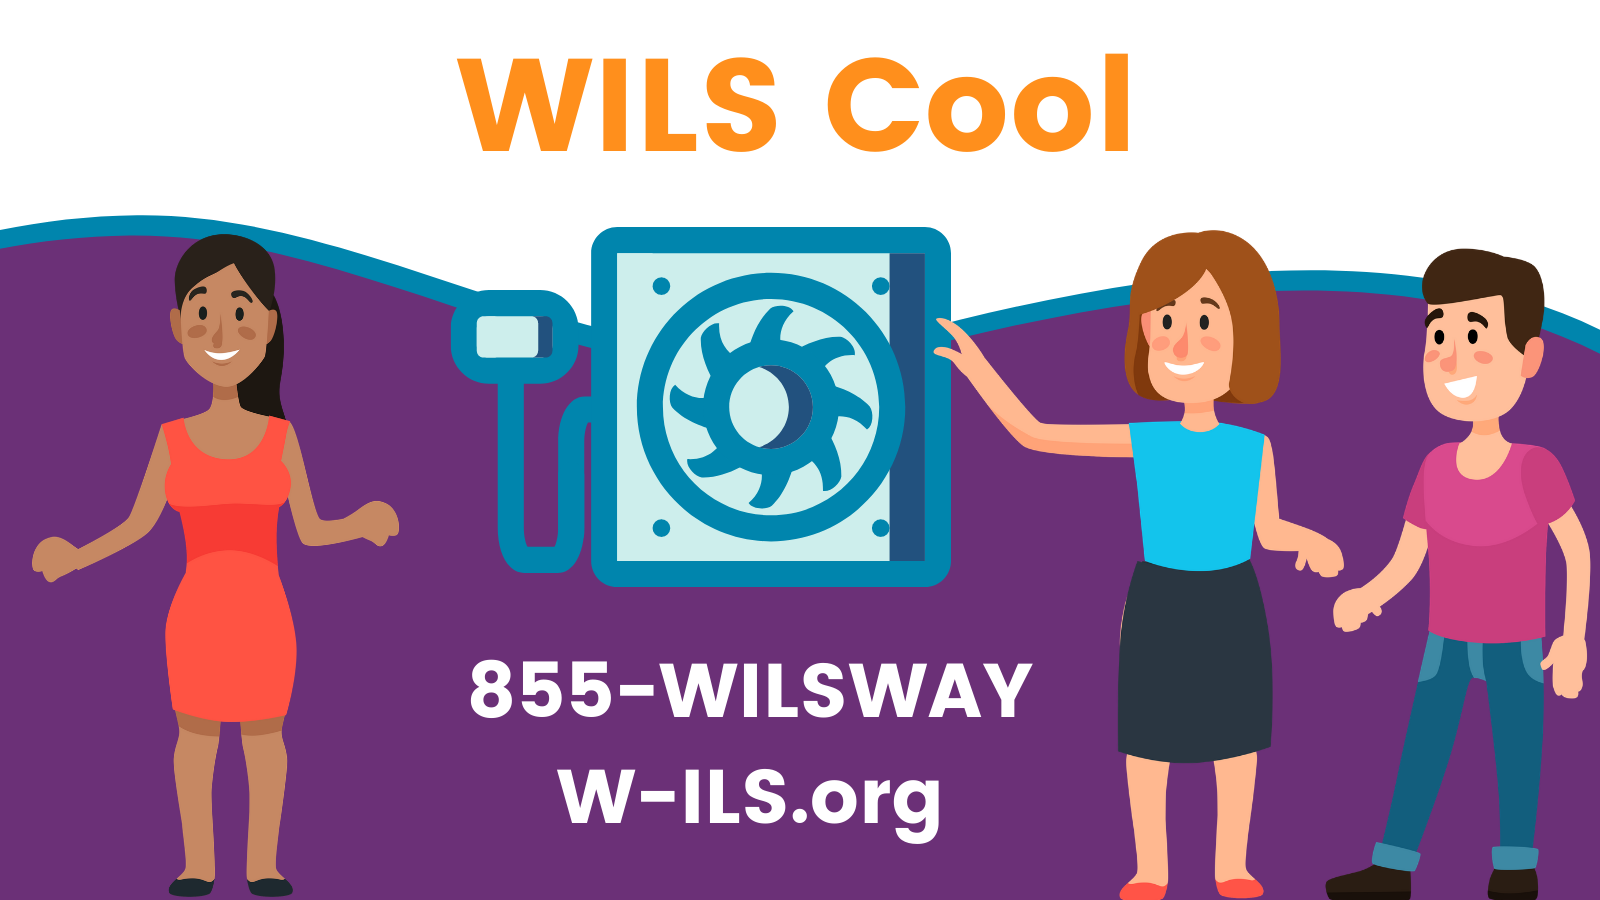 To learn about WILS Cool, call 855-WILSWAY or visit W-ILS.org